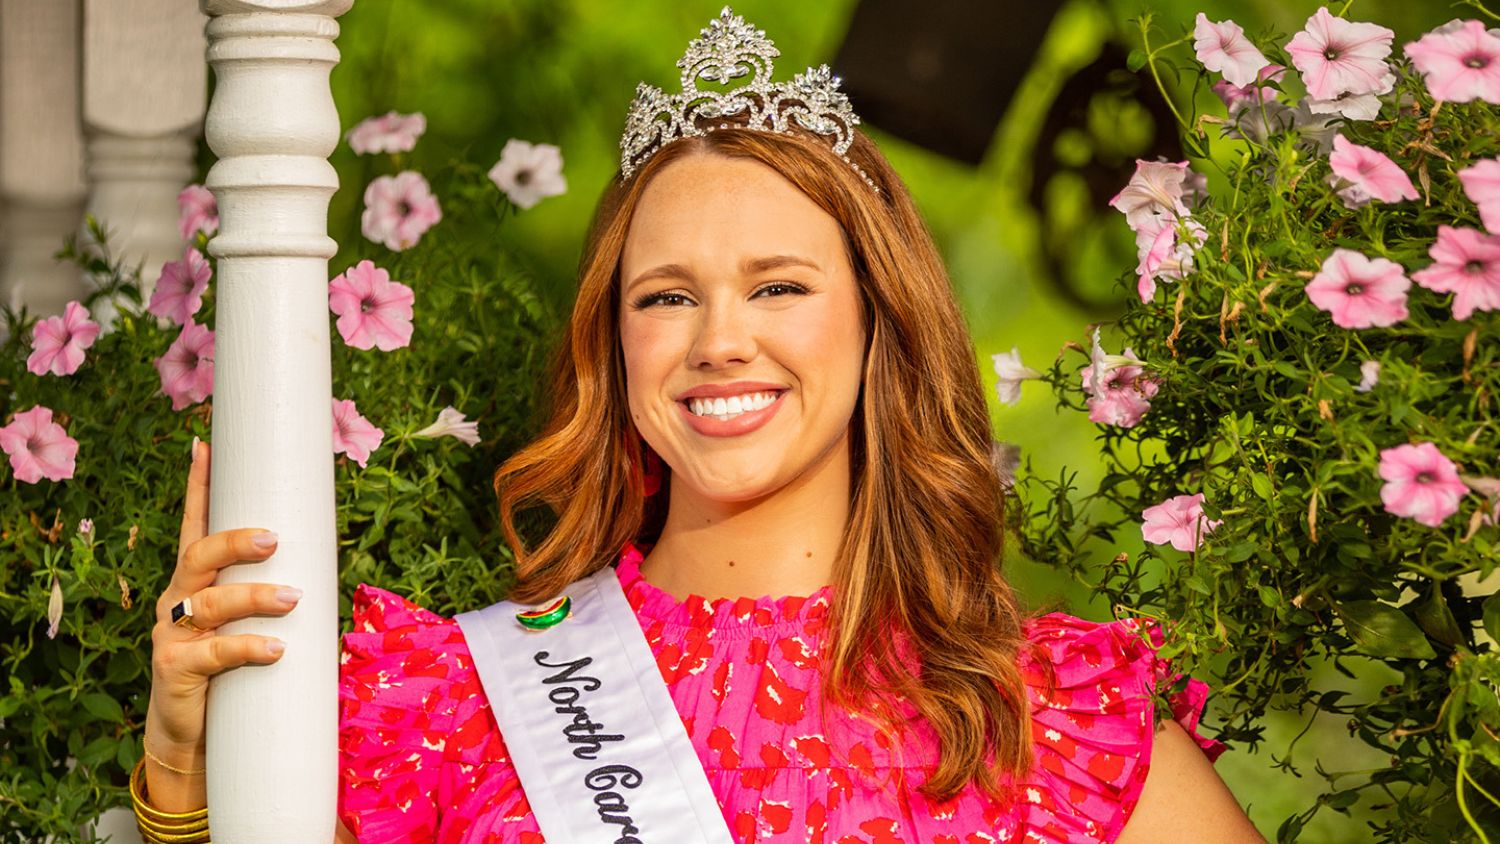 Gracy Peterson wearing her Watermelon Queen sash and crown